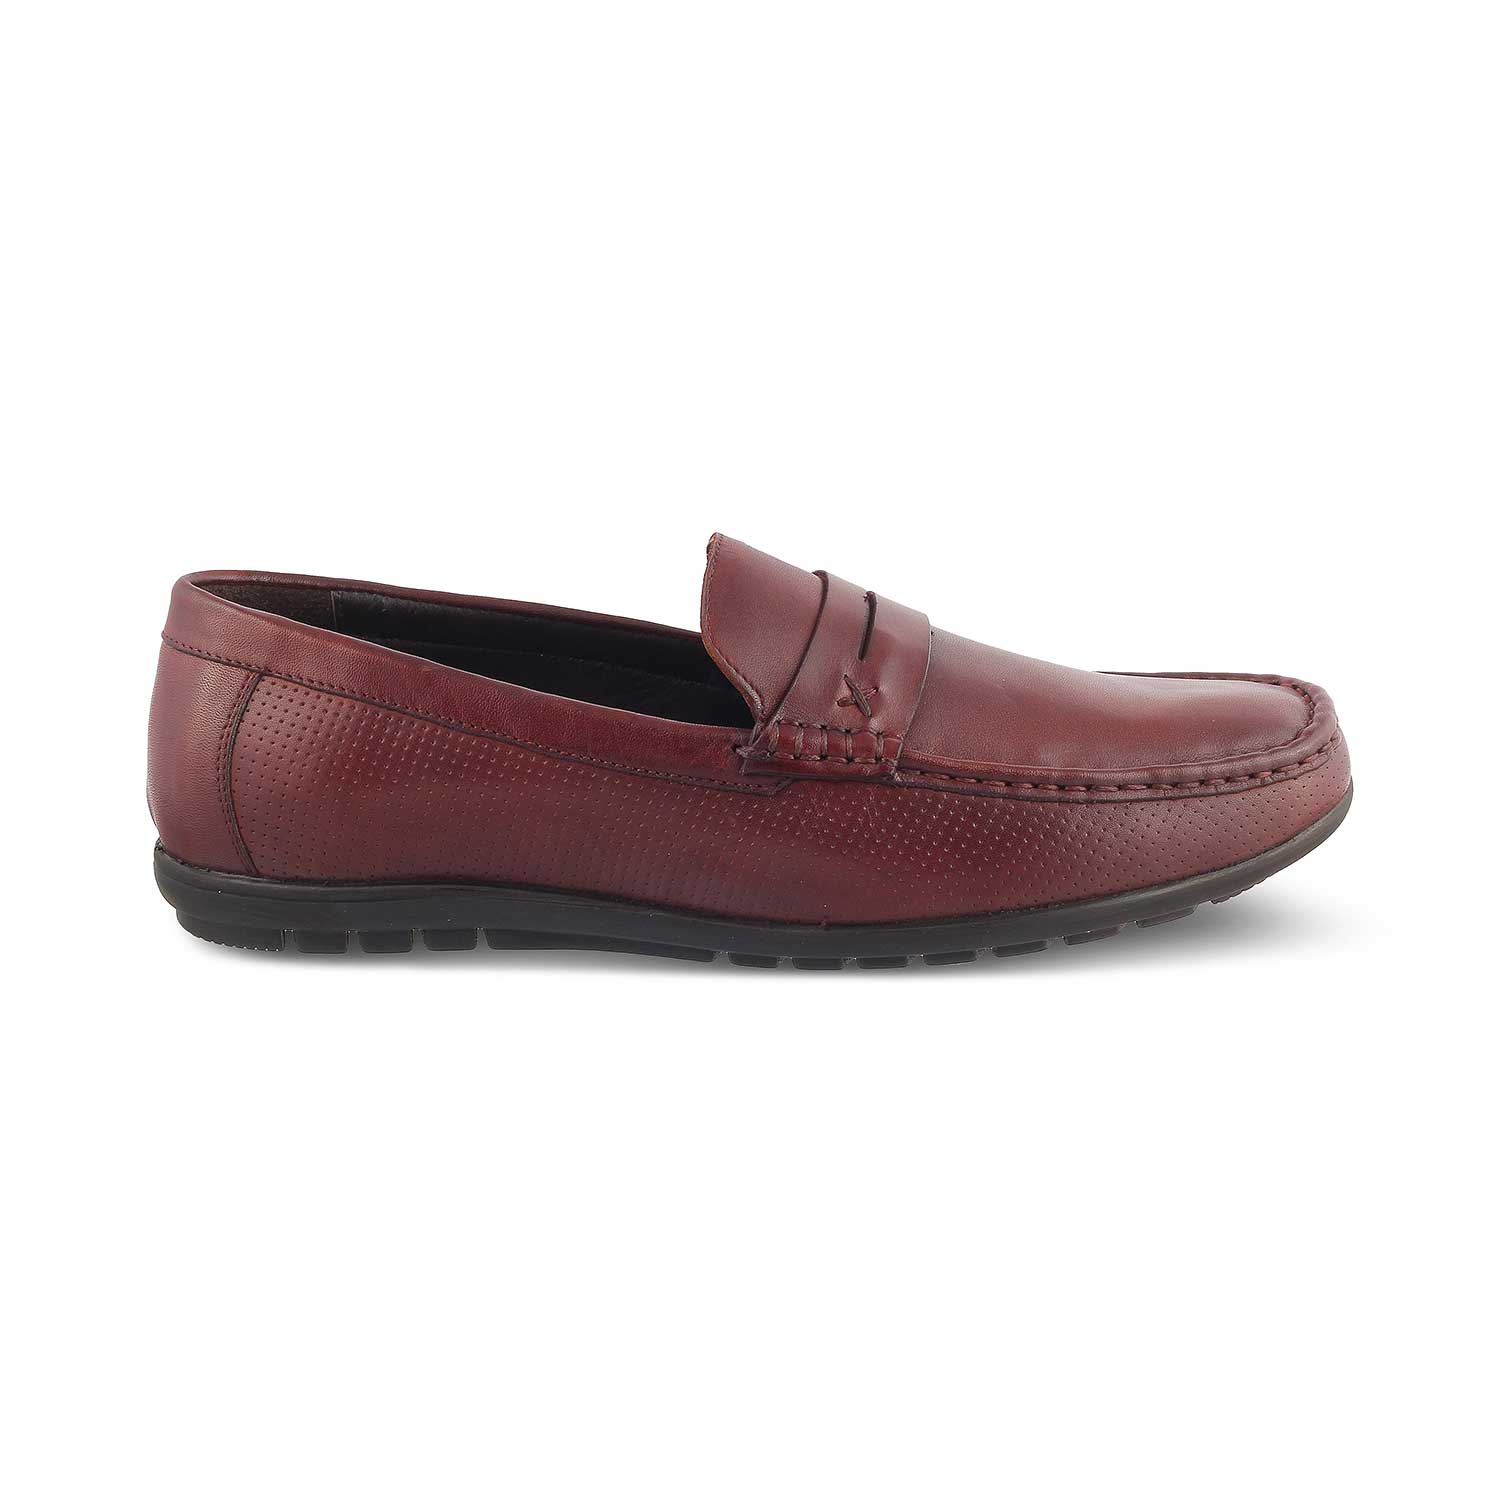 Tresmode-The Yolof Brown Men's Leather Loafers Tresmode-Tresmode